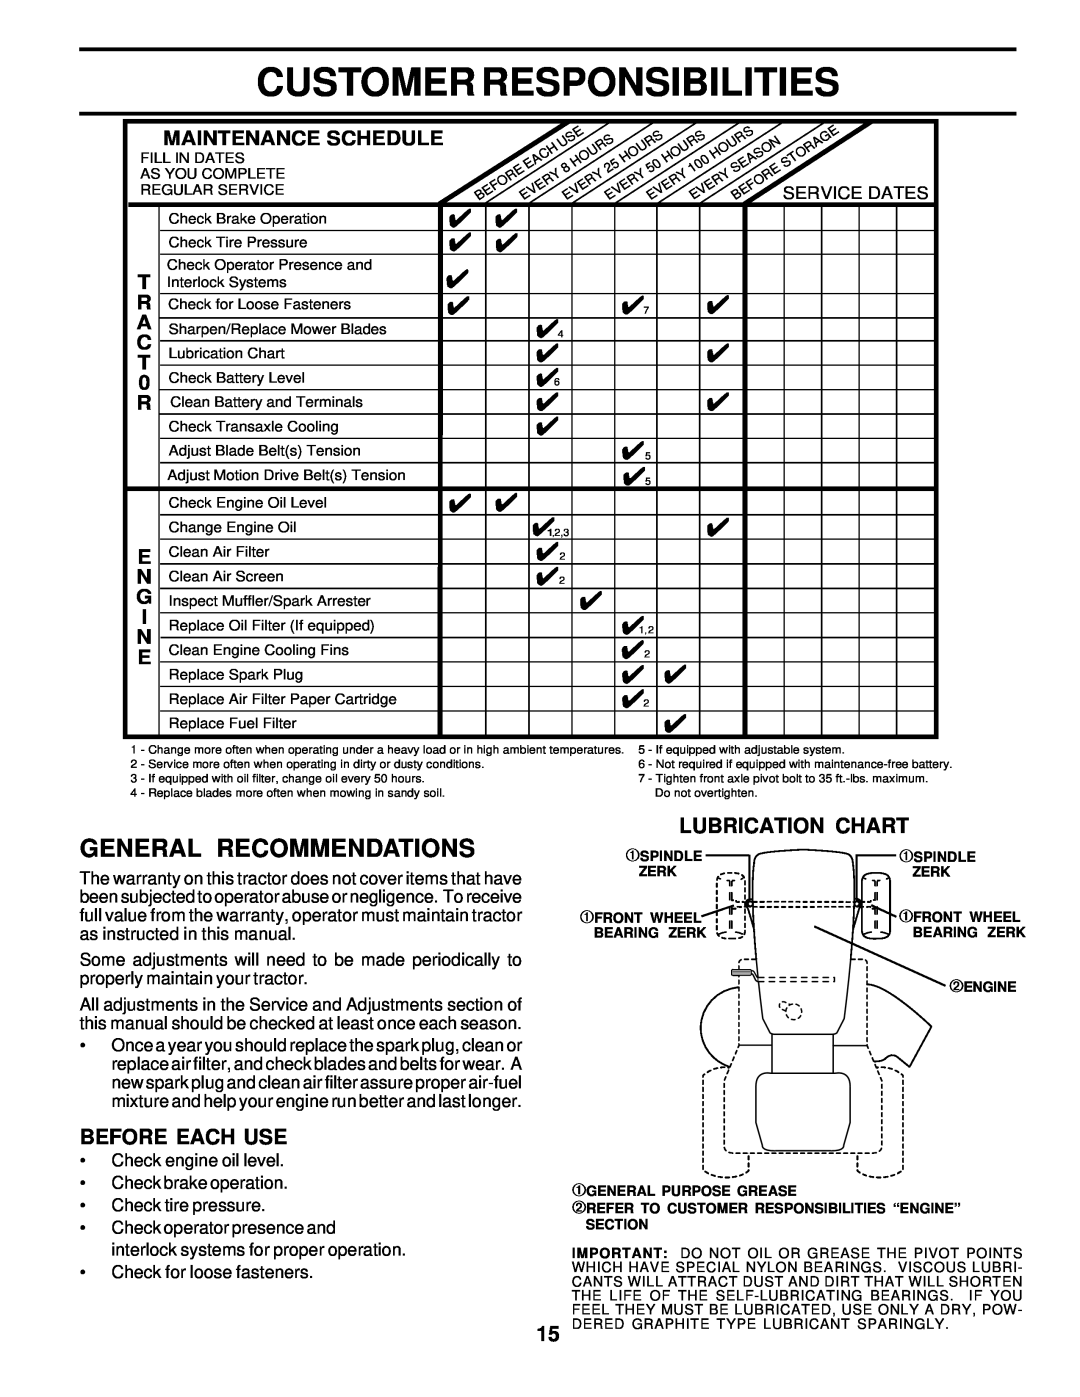 Poulan 178219 Customer Responsibilities, General Recommendations, Before Each Use, Lubrication Chart, Maintenance Schedule 